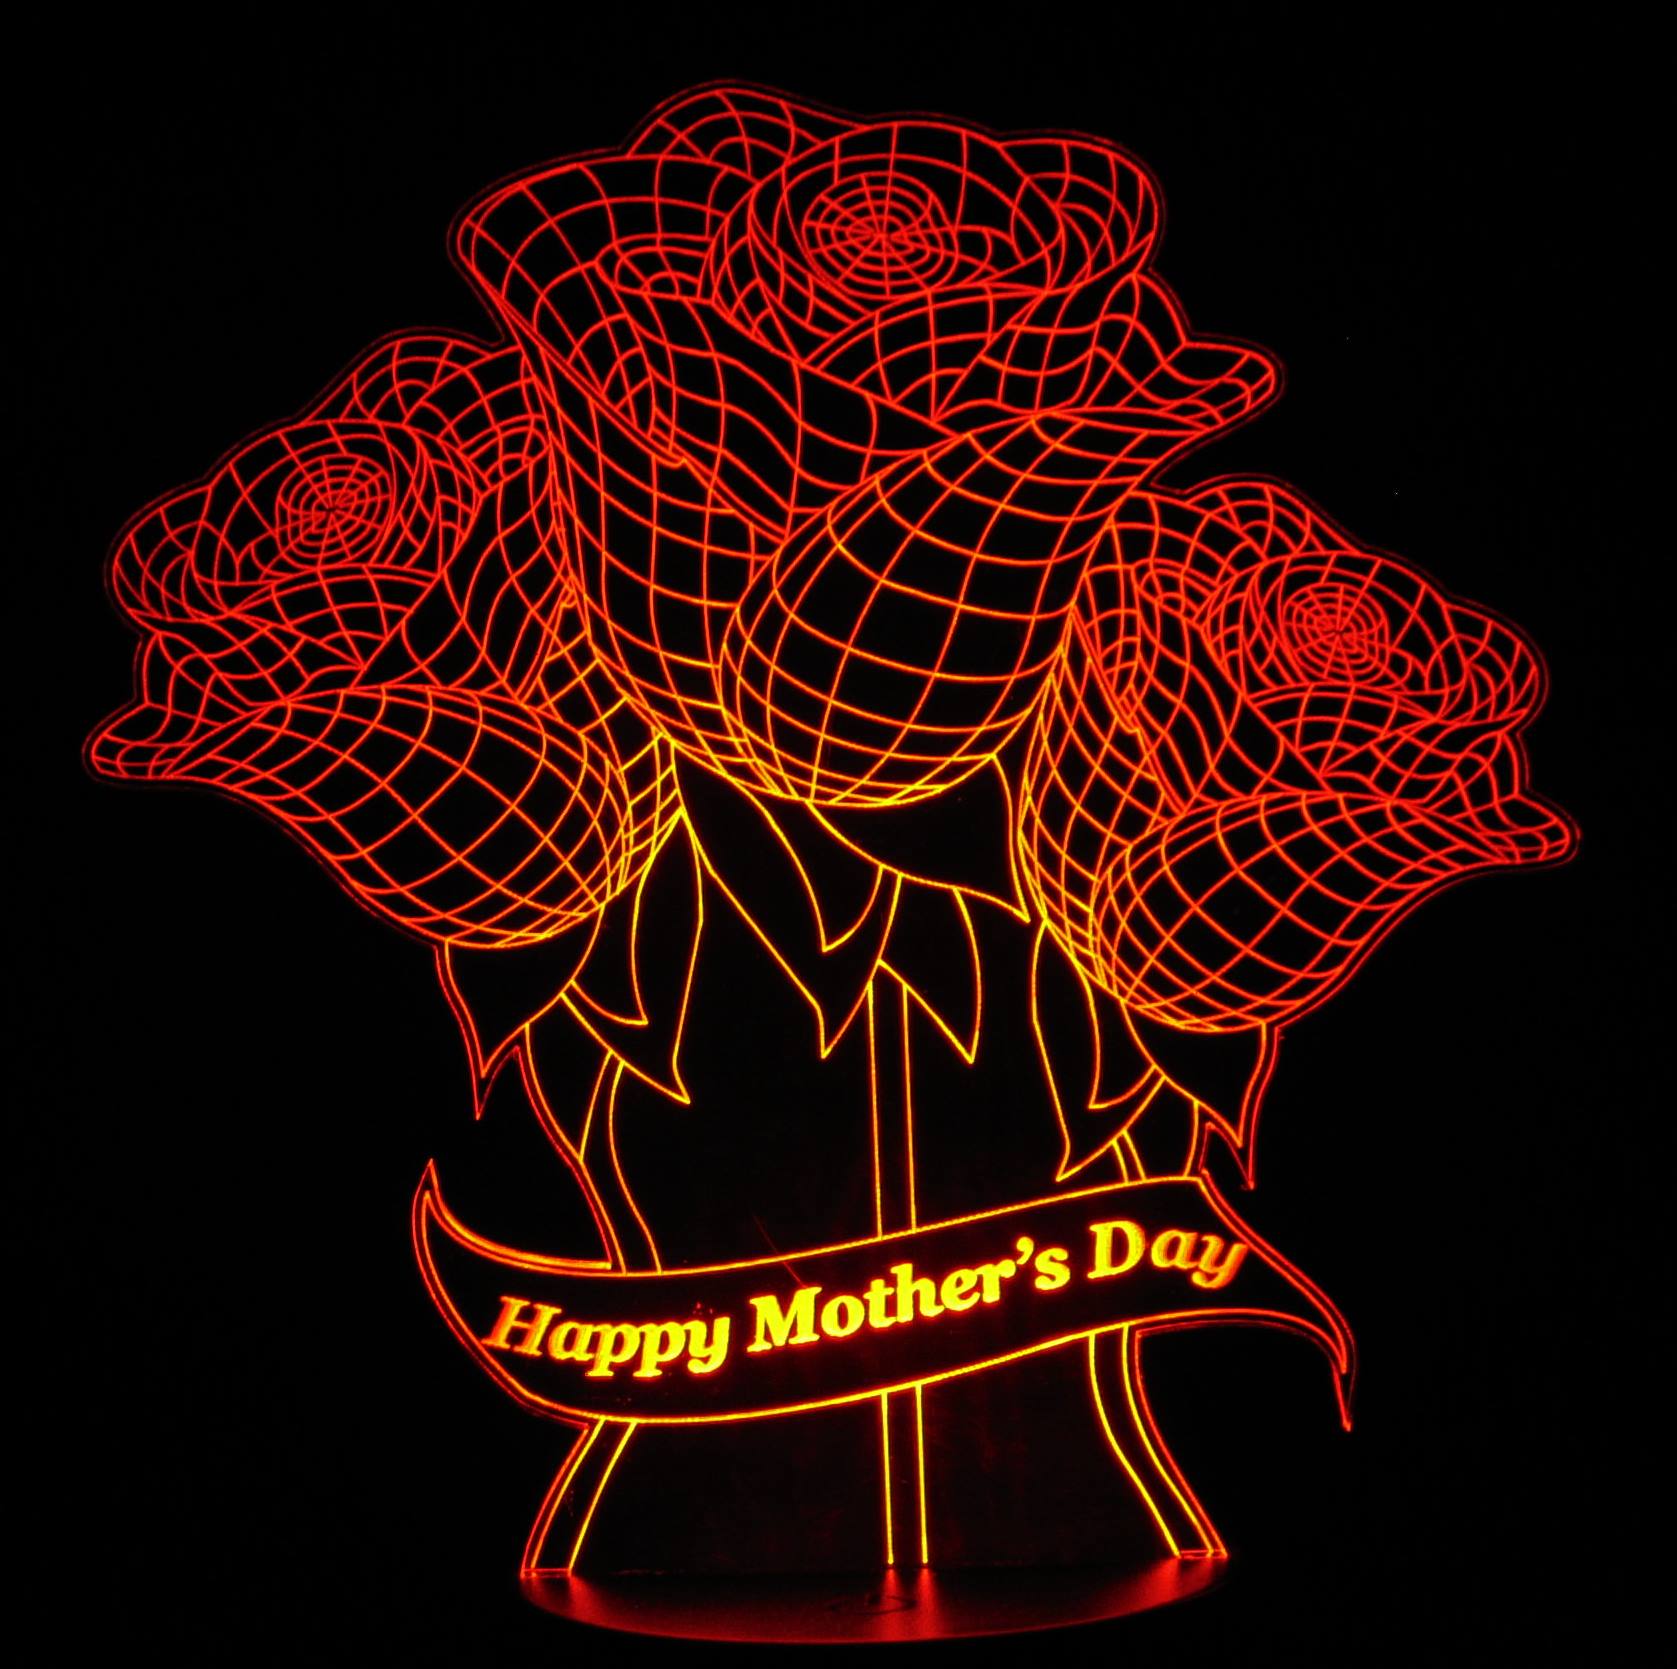 Mother's Day Flowers LED Desk, Table, Night Lamp